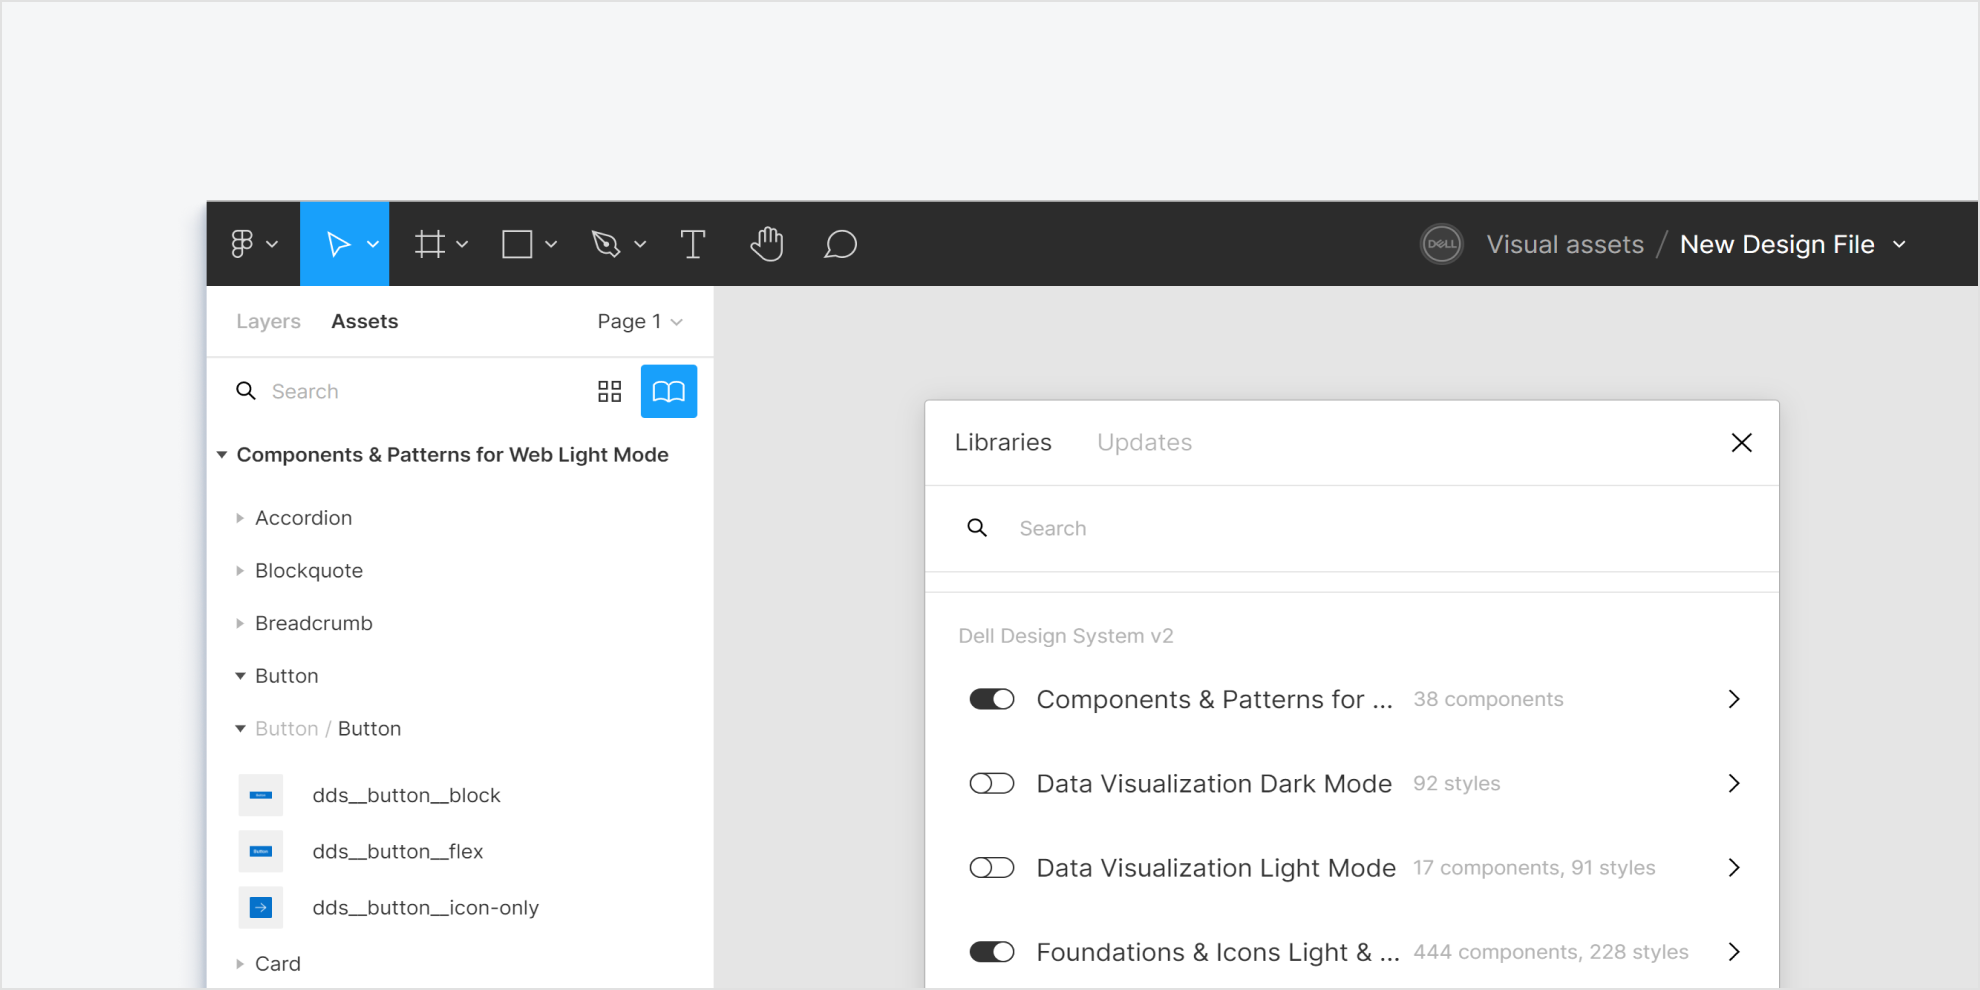 The library modal in Figma showing a list of available DDS v2 libraries